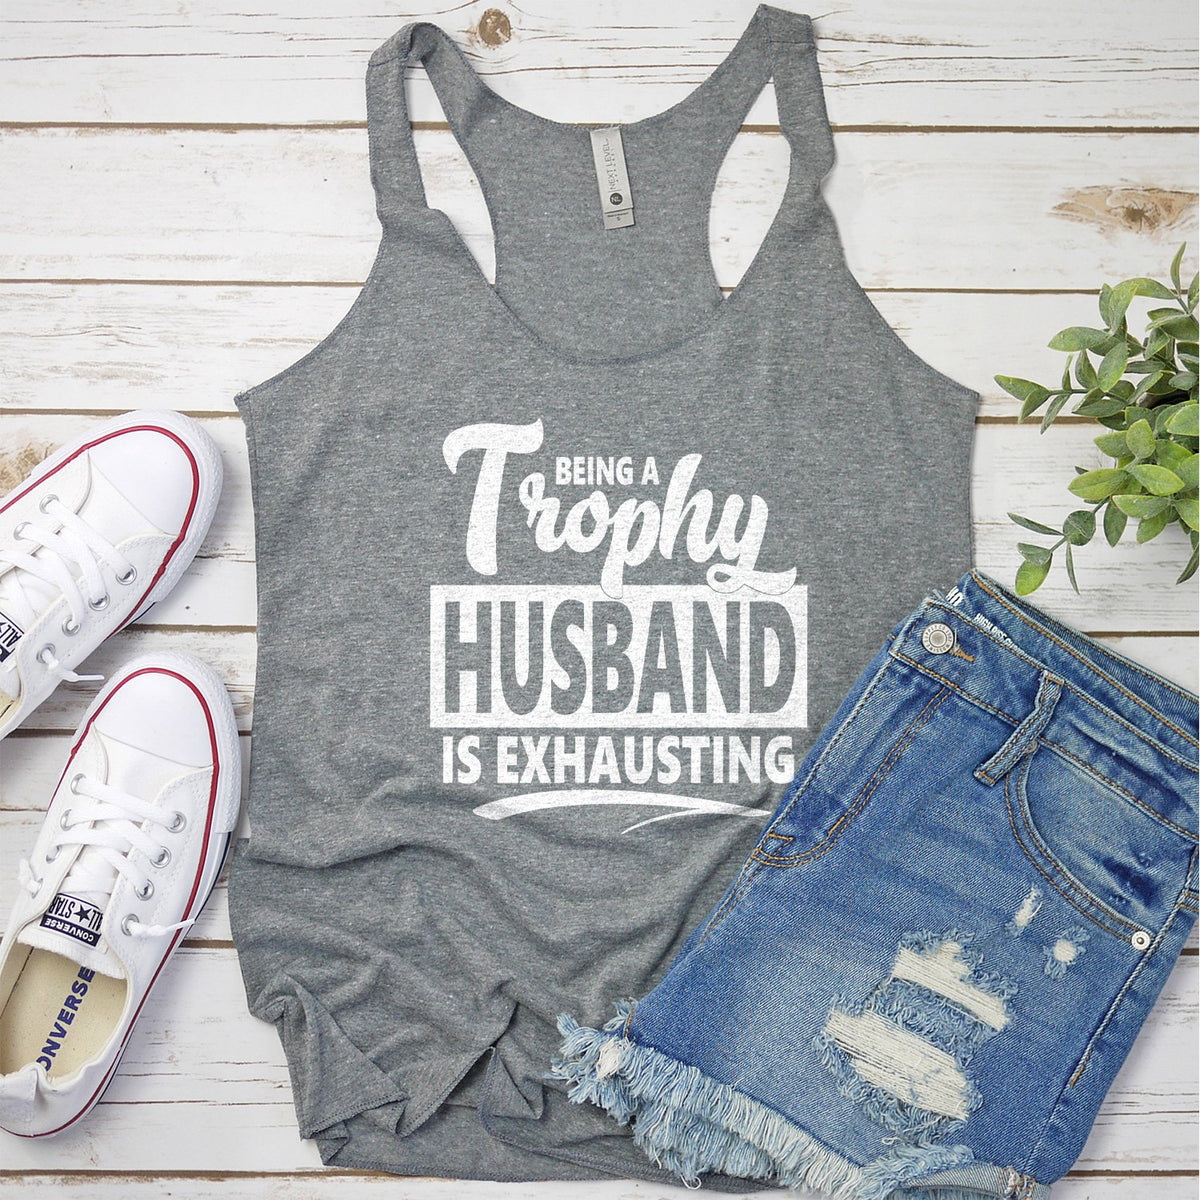 Being A Trophy Husband is Exhausting - Tank Top Racerback